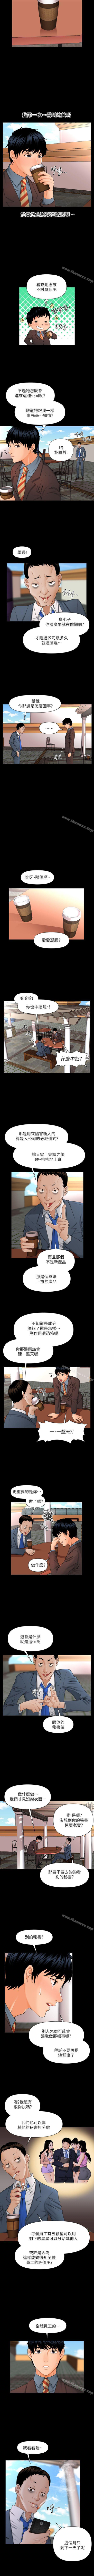 Best Blow Jobs Ever 秘書的潛規則 1-100 Maledom - Page 8